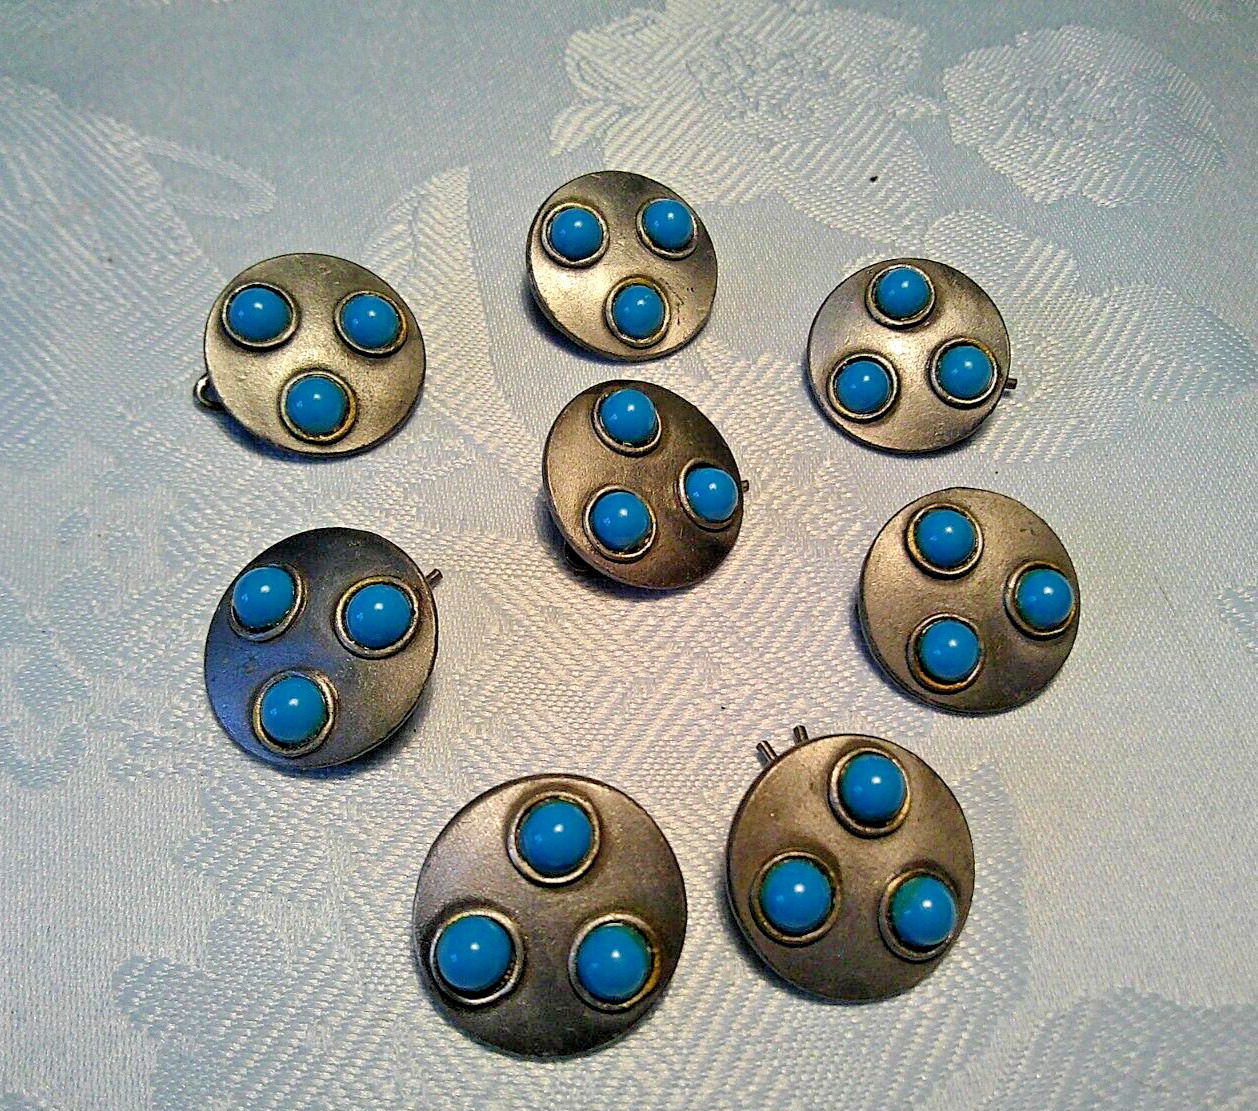 unique silver tone buttons (8) each with 3 turquoiseblue colored beads